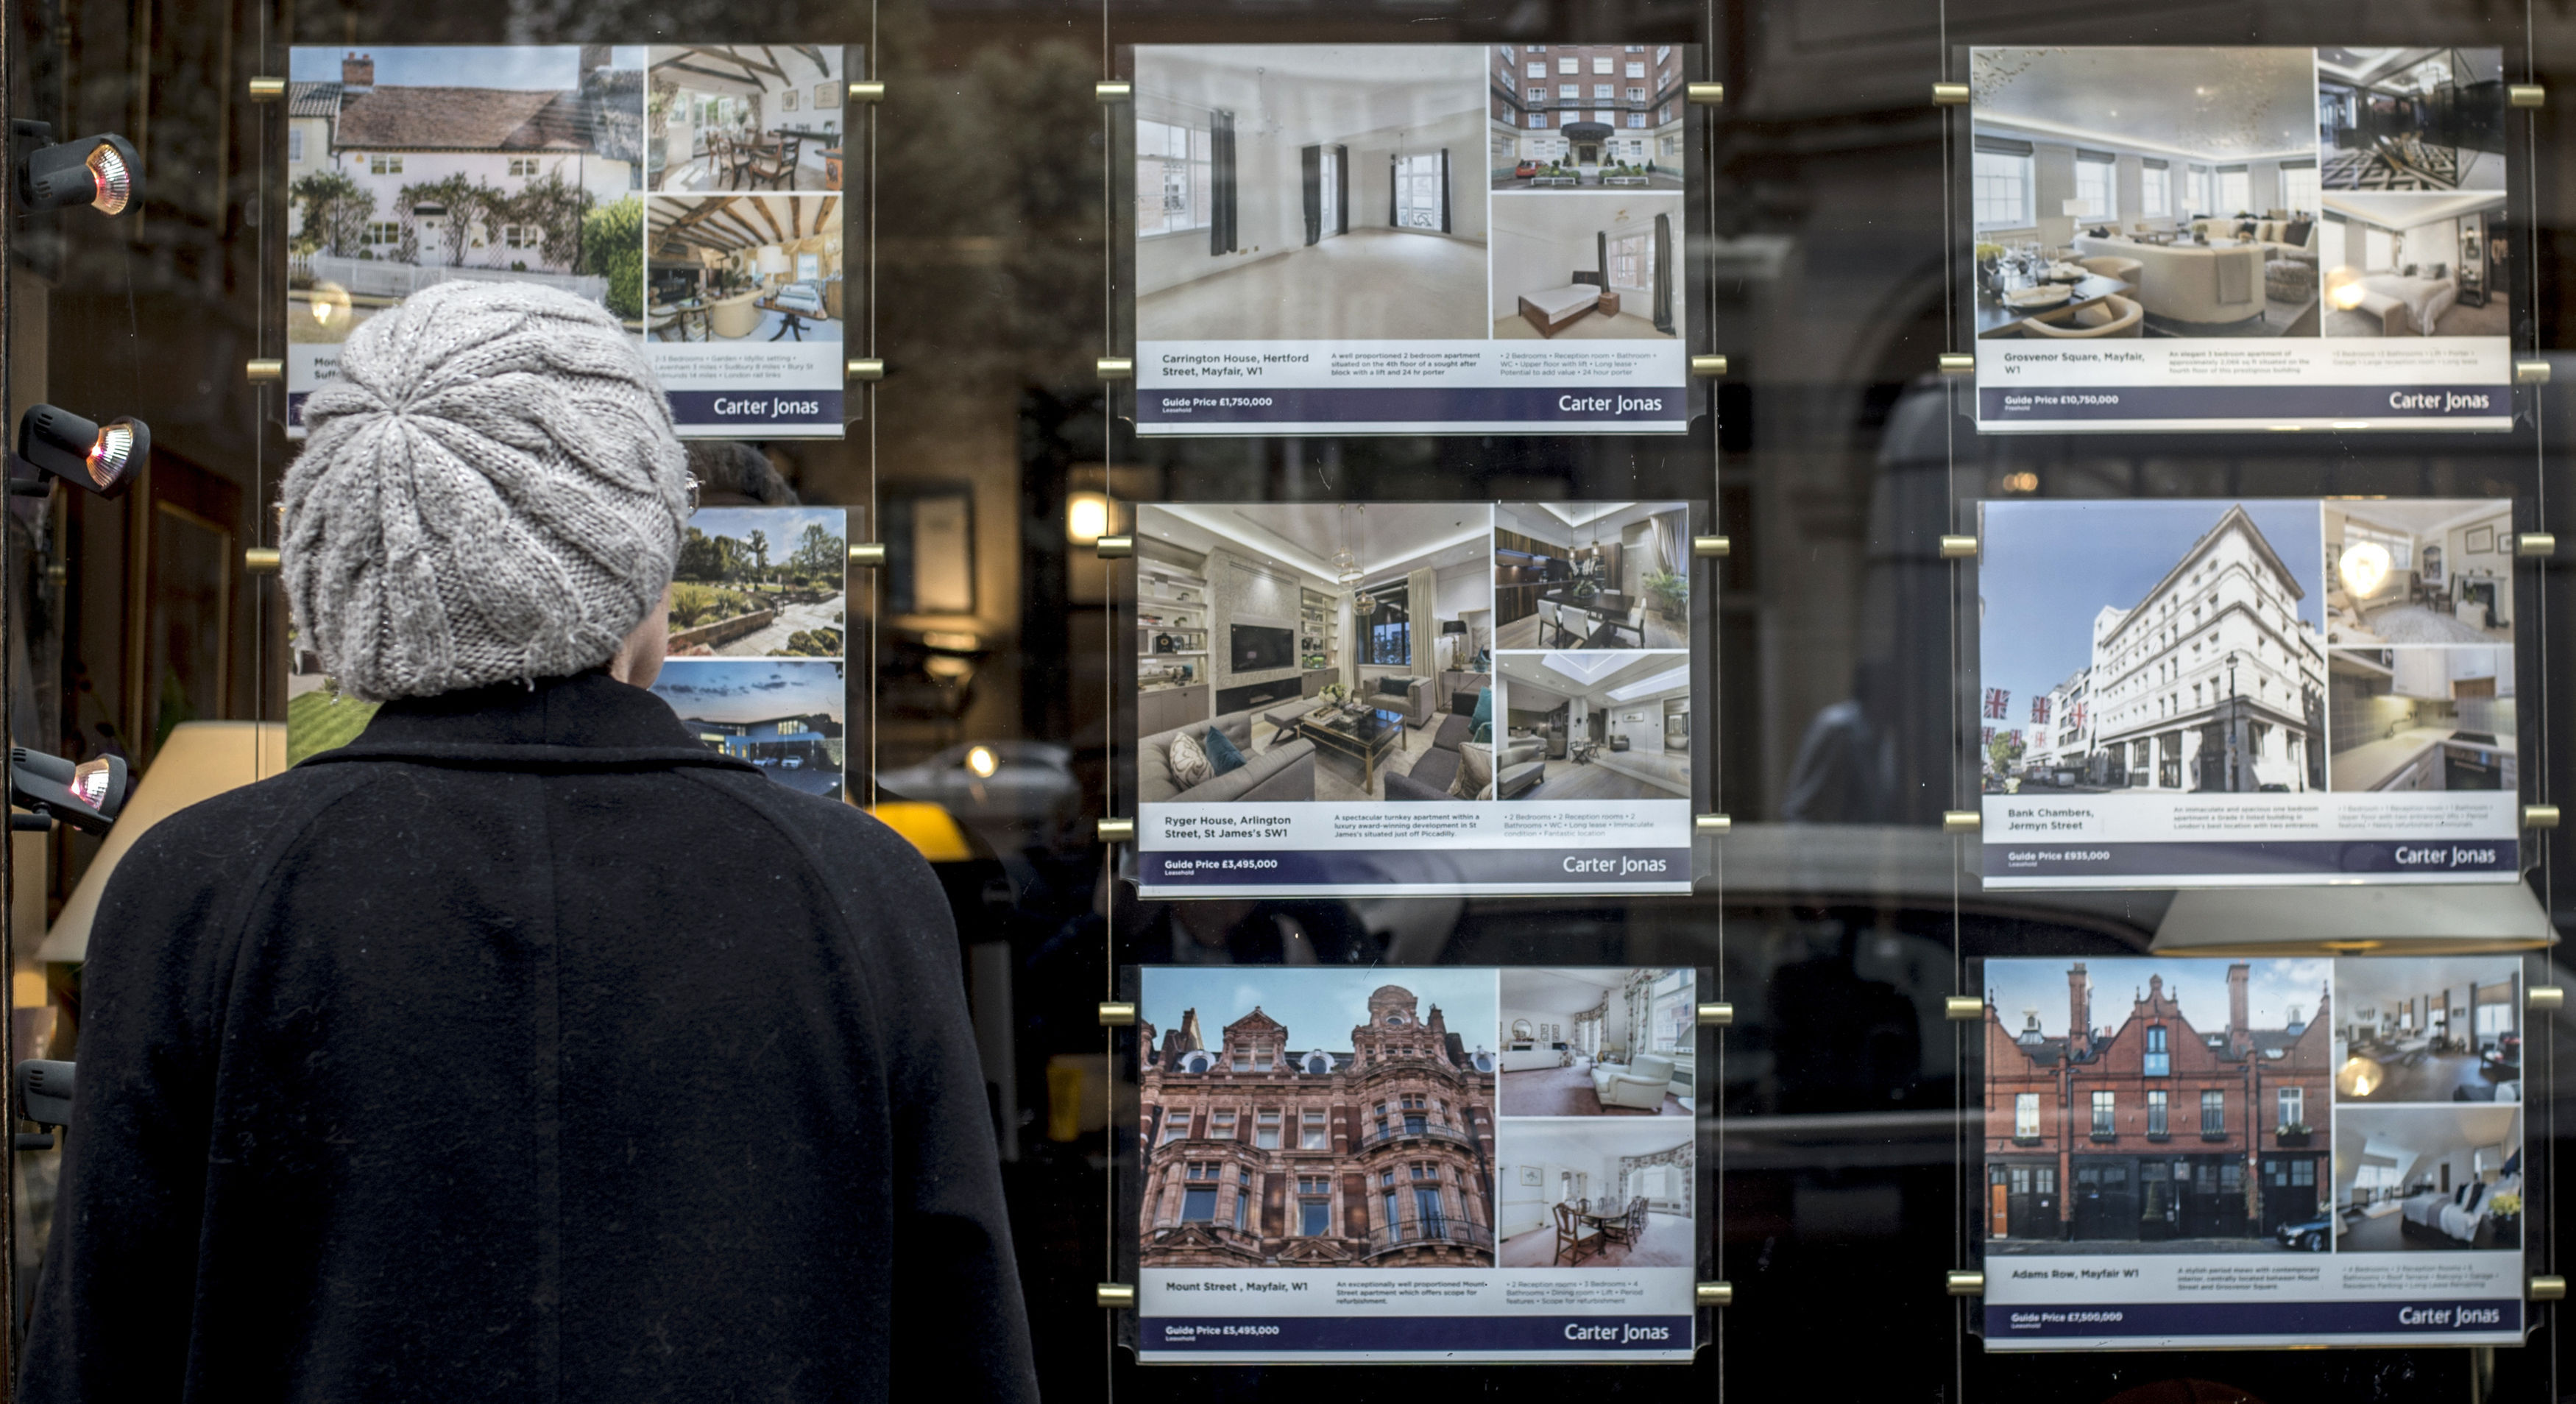 The research, from property website Zoopla, found the typical decision to buy a home when viewing it in person takes 27 minutes - around the same length of time as an episode of Coronation Street. (Lauren Hurley/PA Wire)